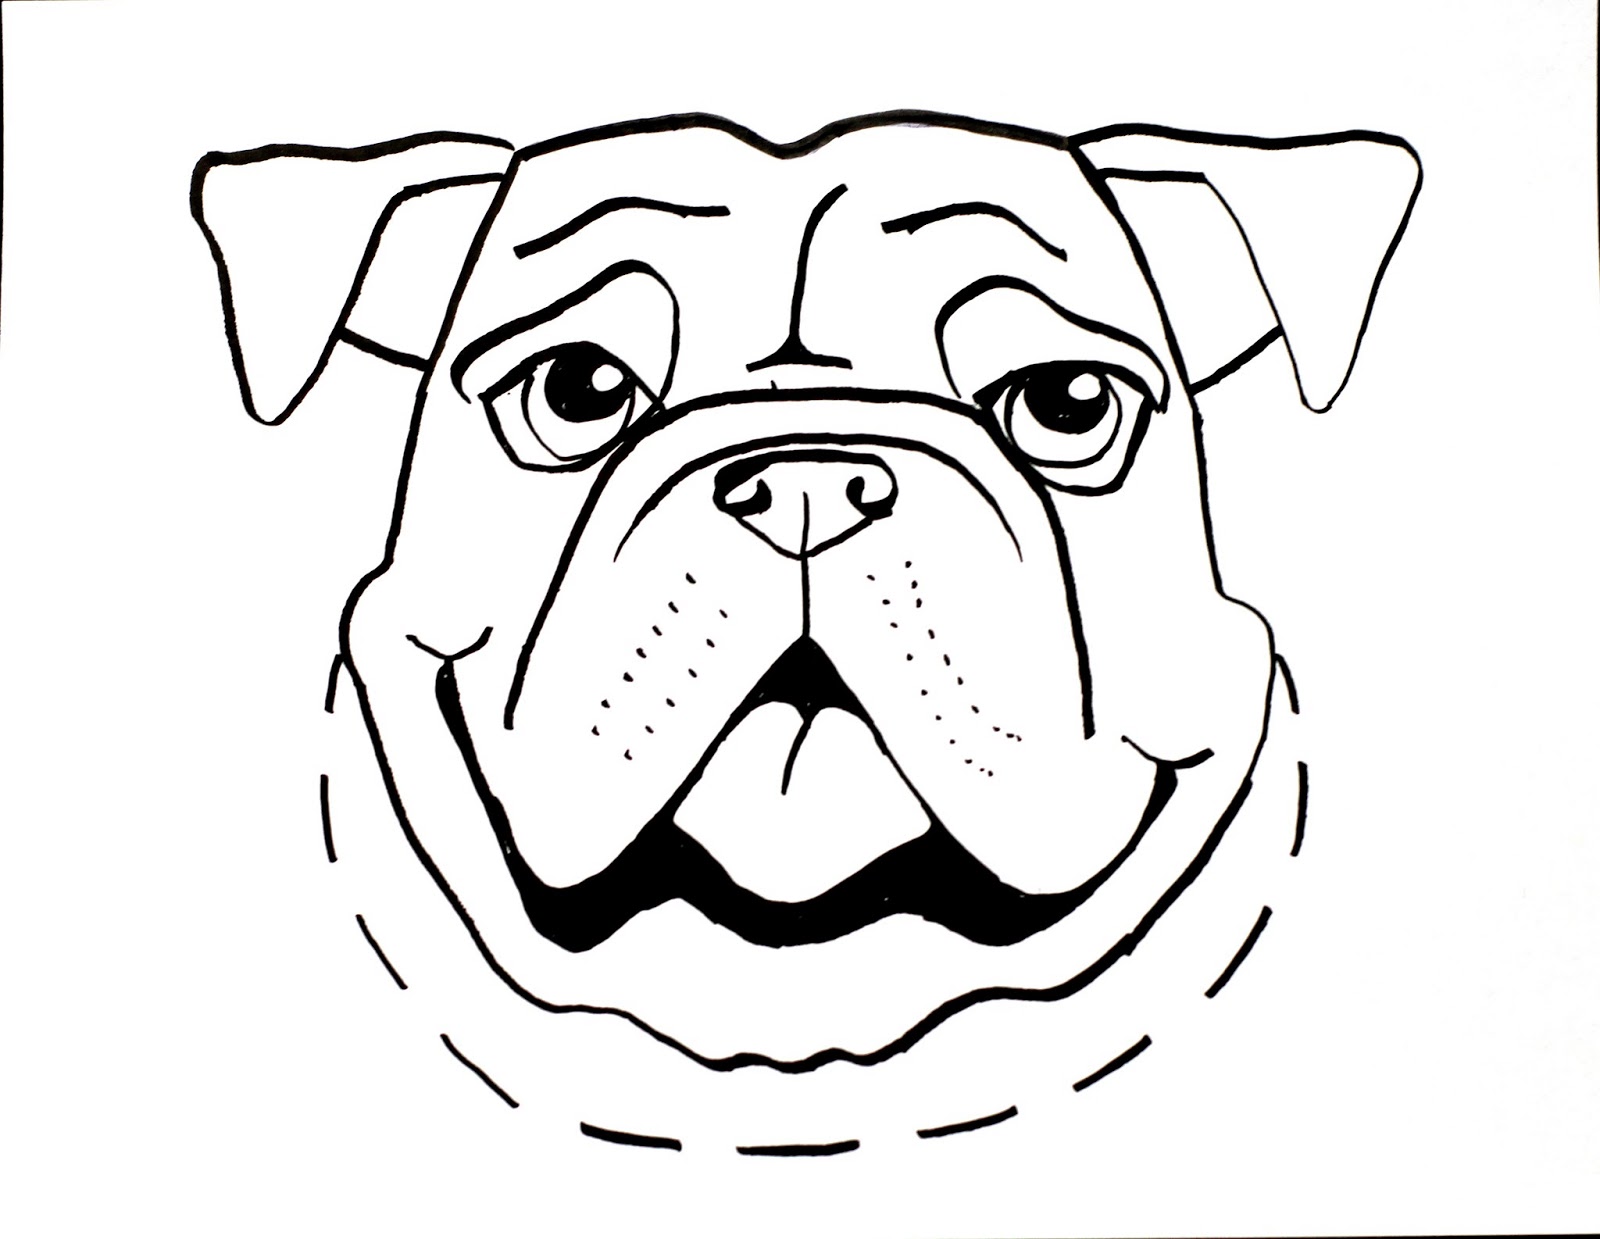 Simple Line Drawings For Kids - ClipArt Best